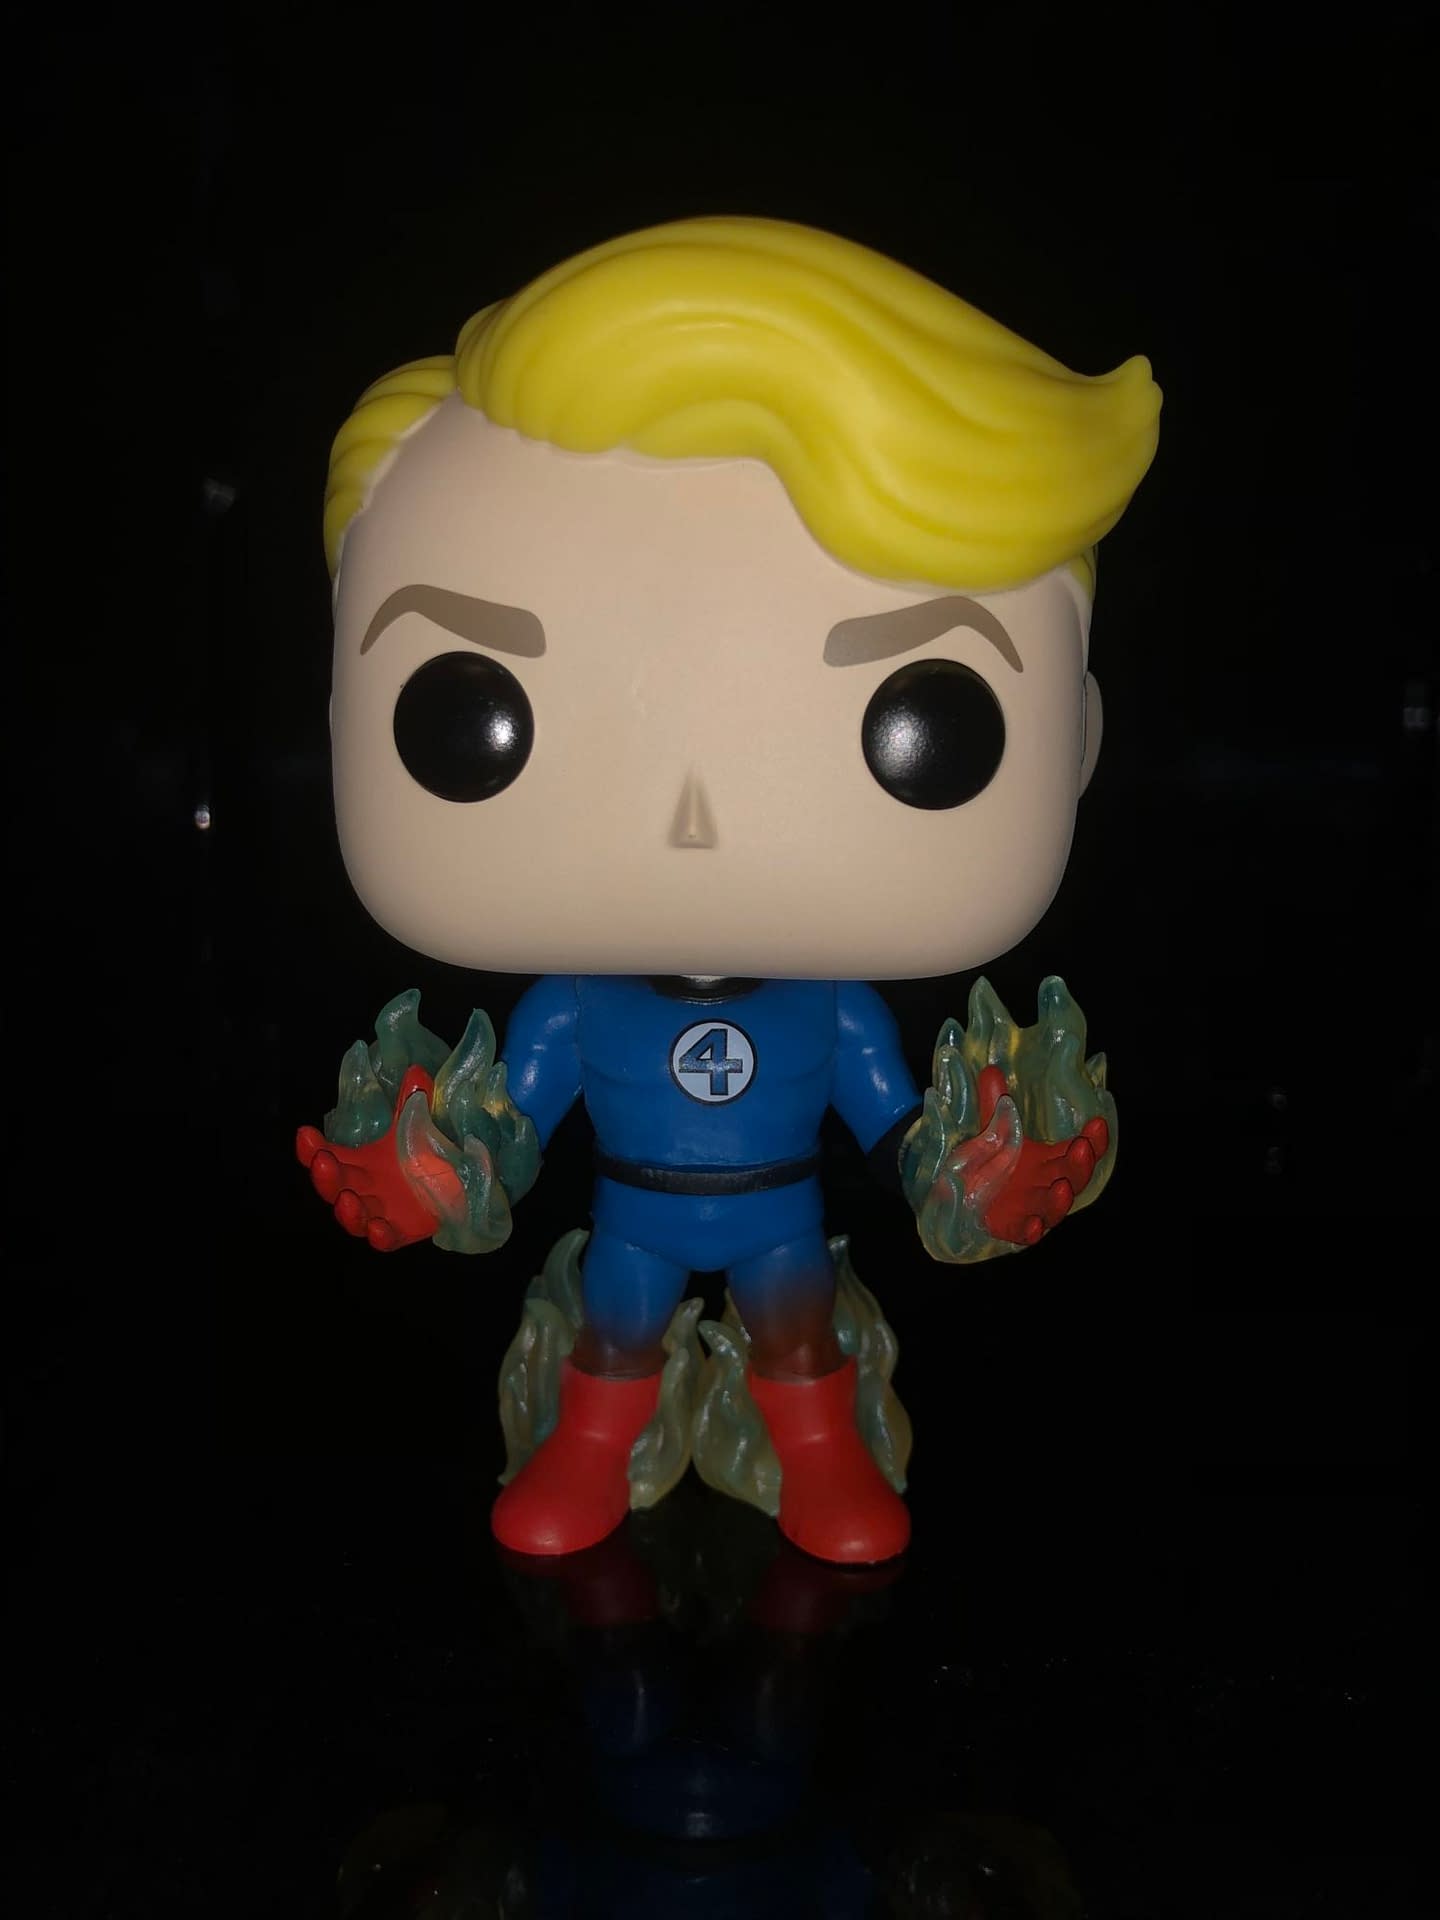 The Fantastic Four Storm Siblings Get Funko Pop Exclusives [Review]